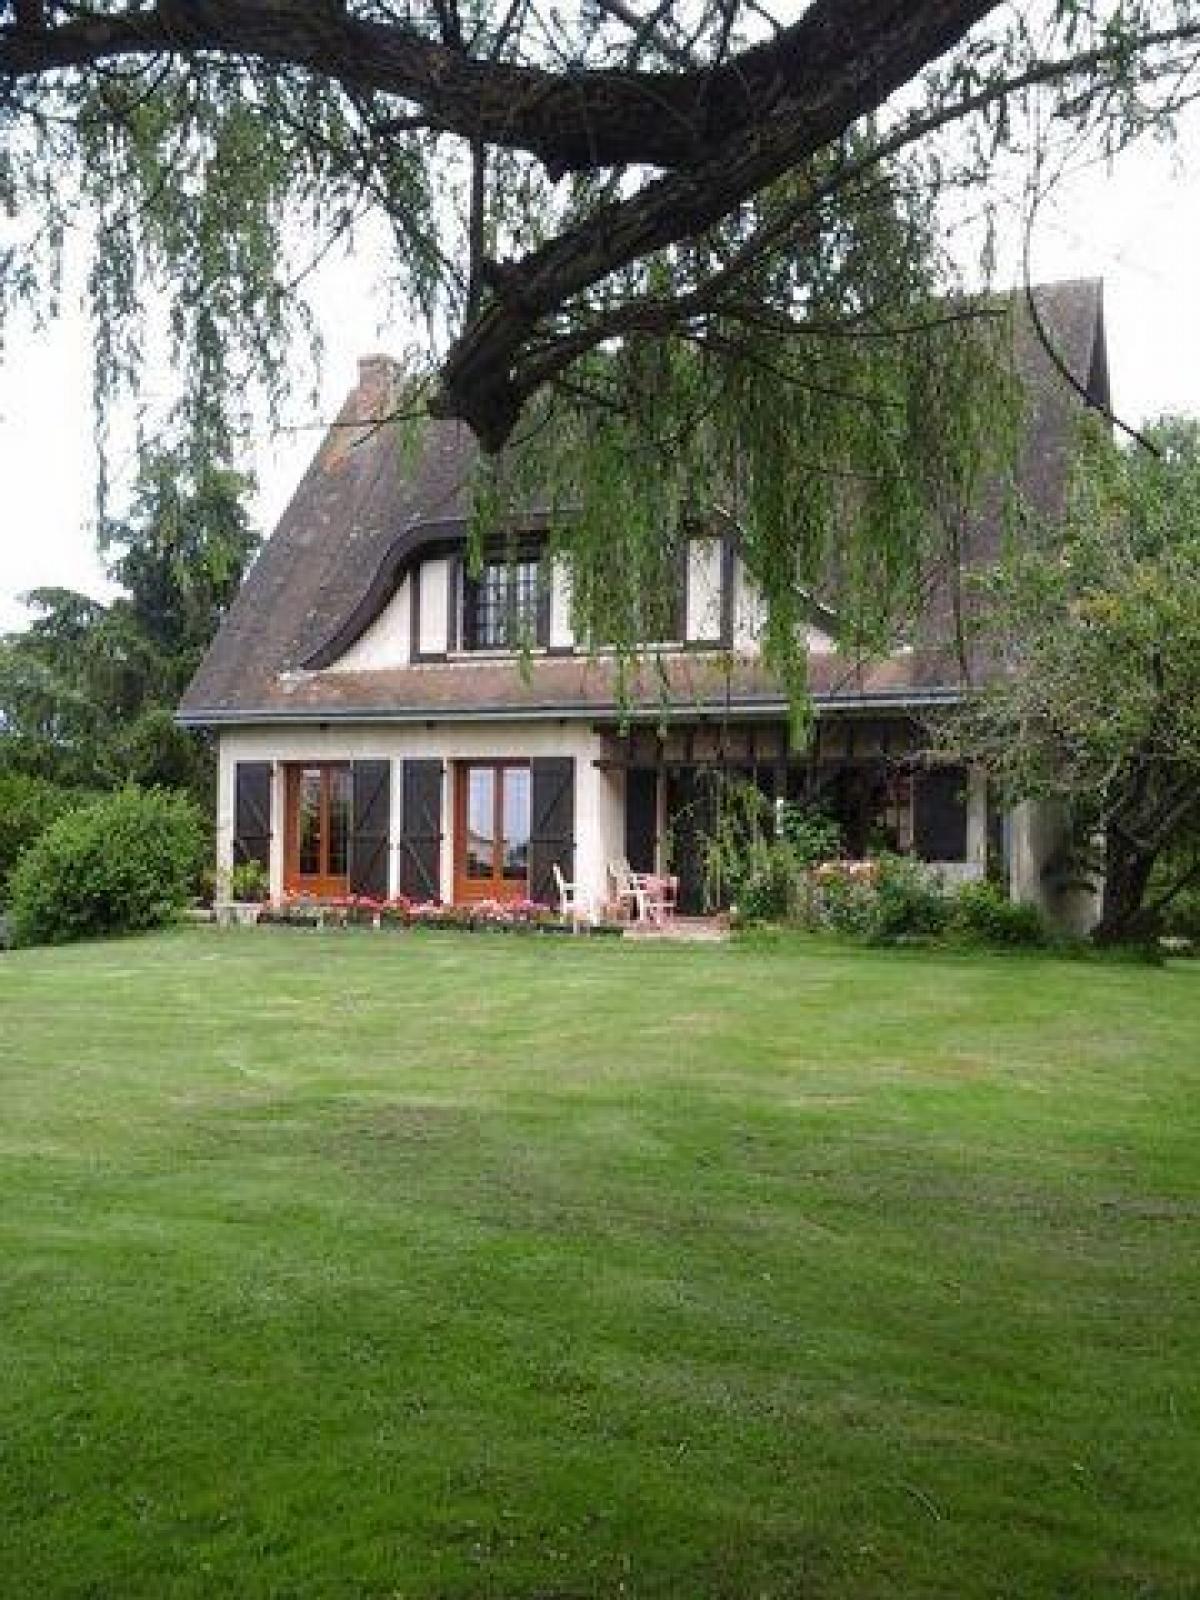 Picture of Home For Sale in Commentry, Auvergne, France